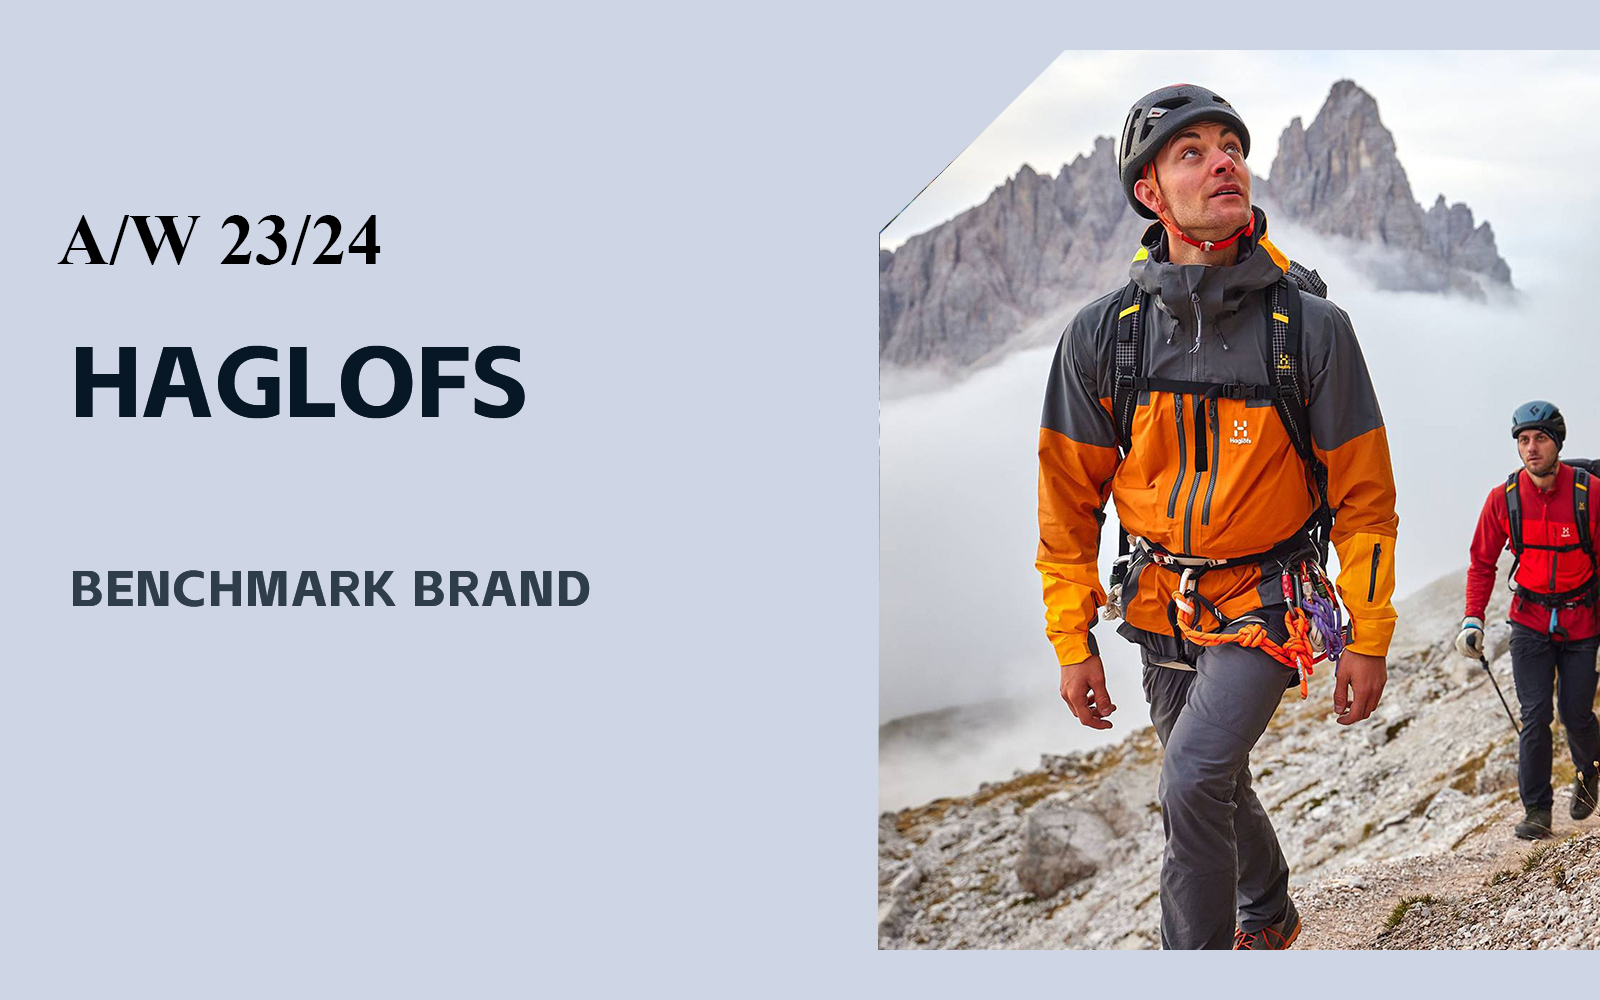 Function Technology -- The Analysis of Haglöfs The Benchmark Outdoor Brand